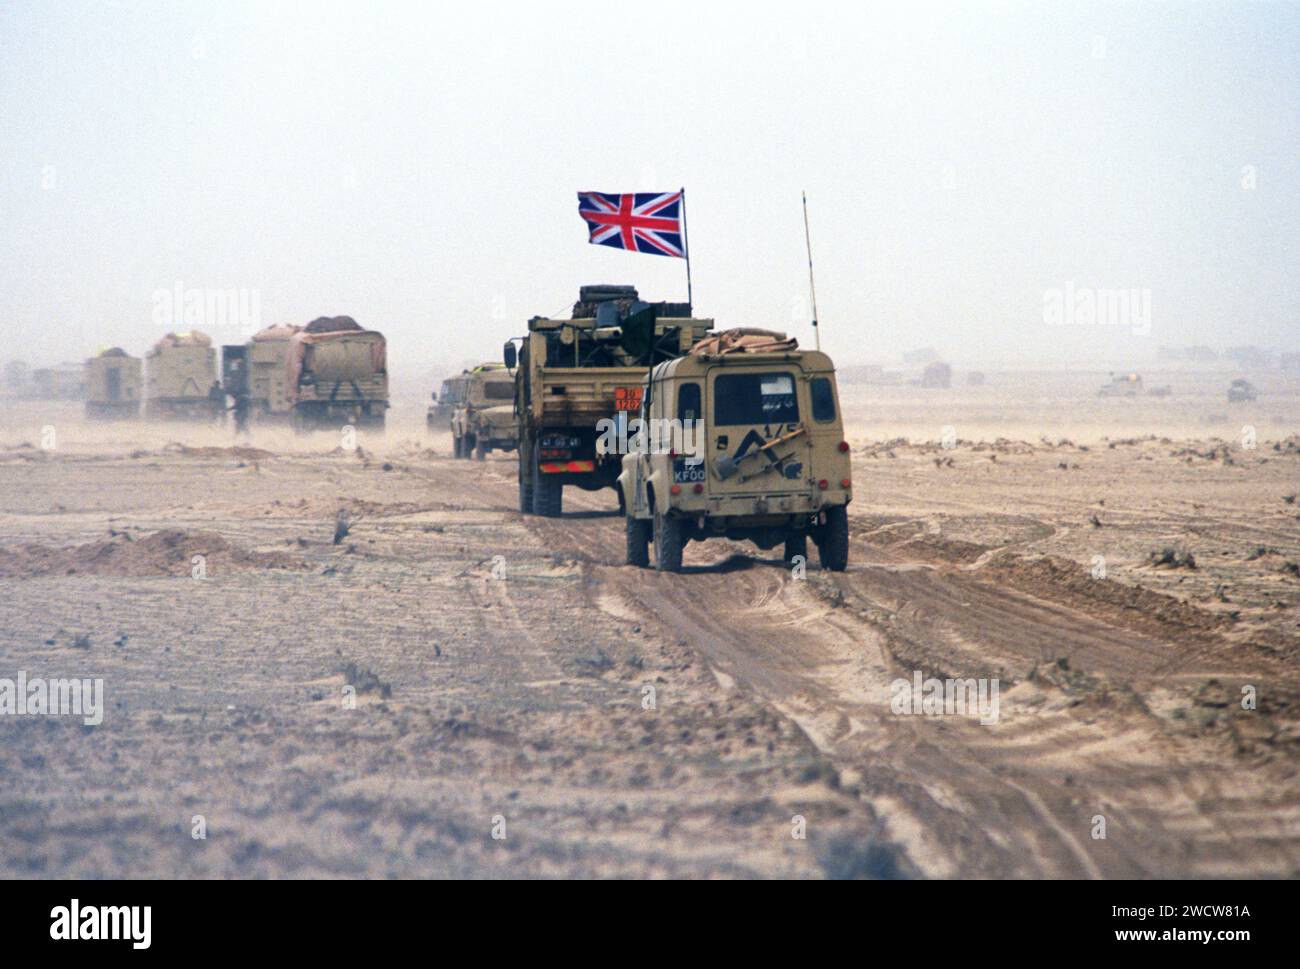 25th February 1991 A British column advances across the desert, west of Kuwait in southern Iraq during the ground war. Stock Photo